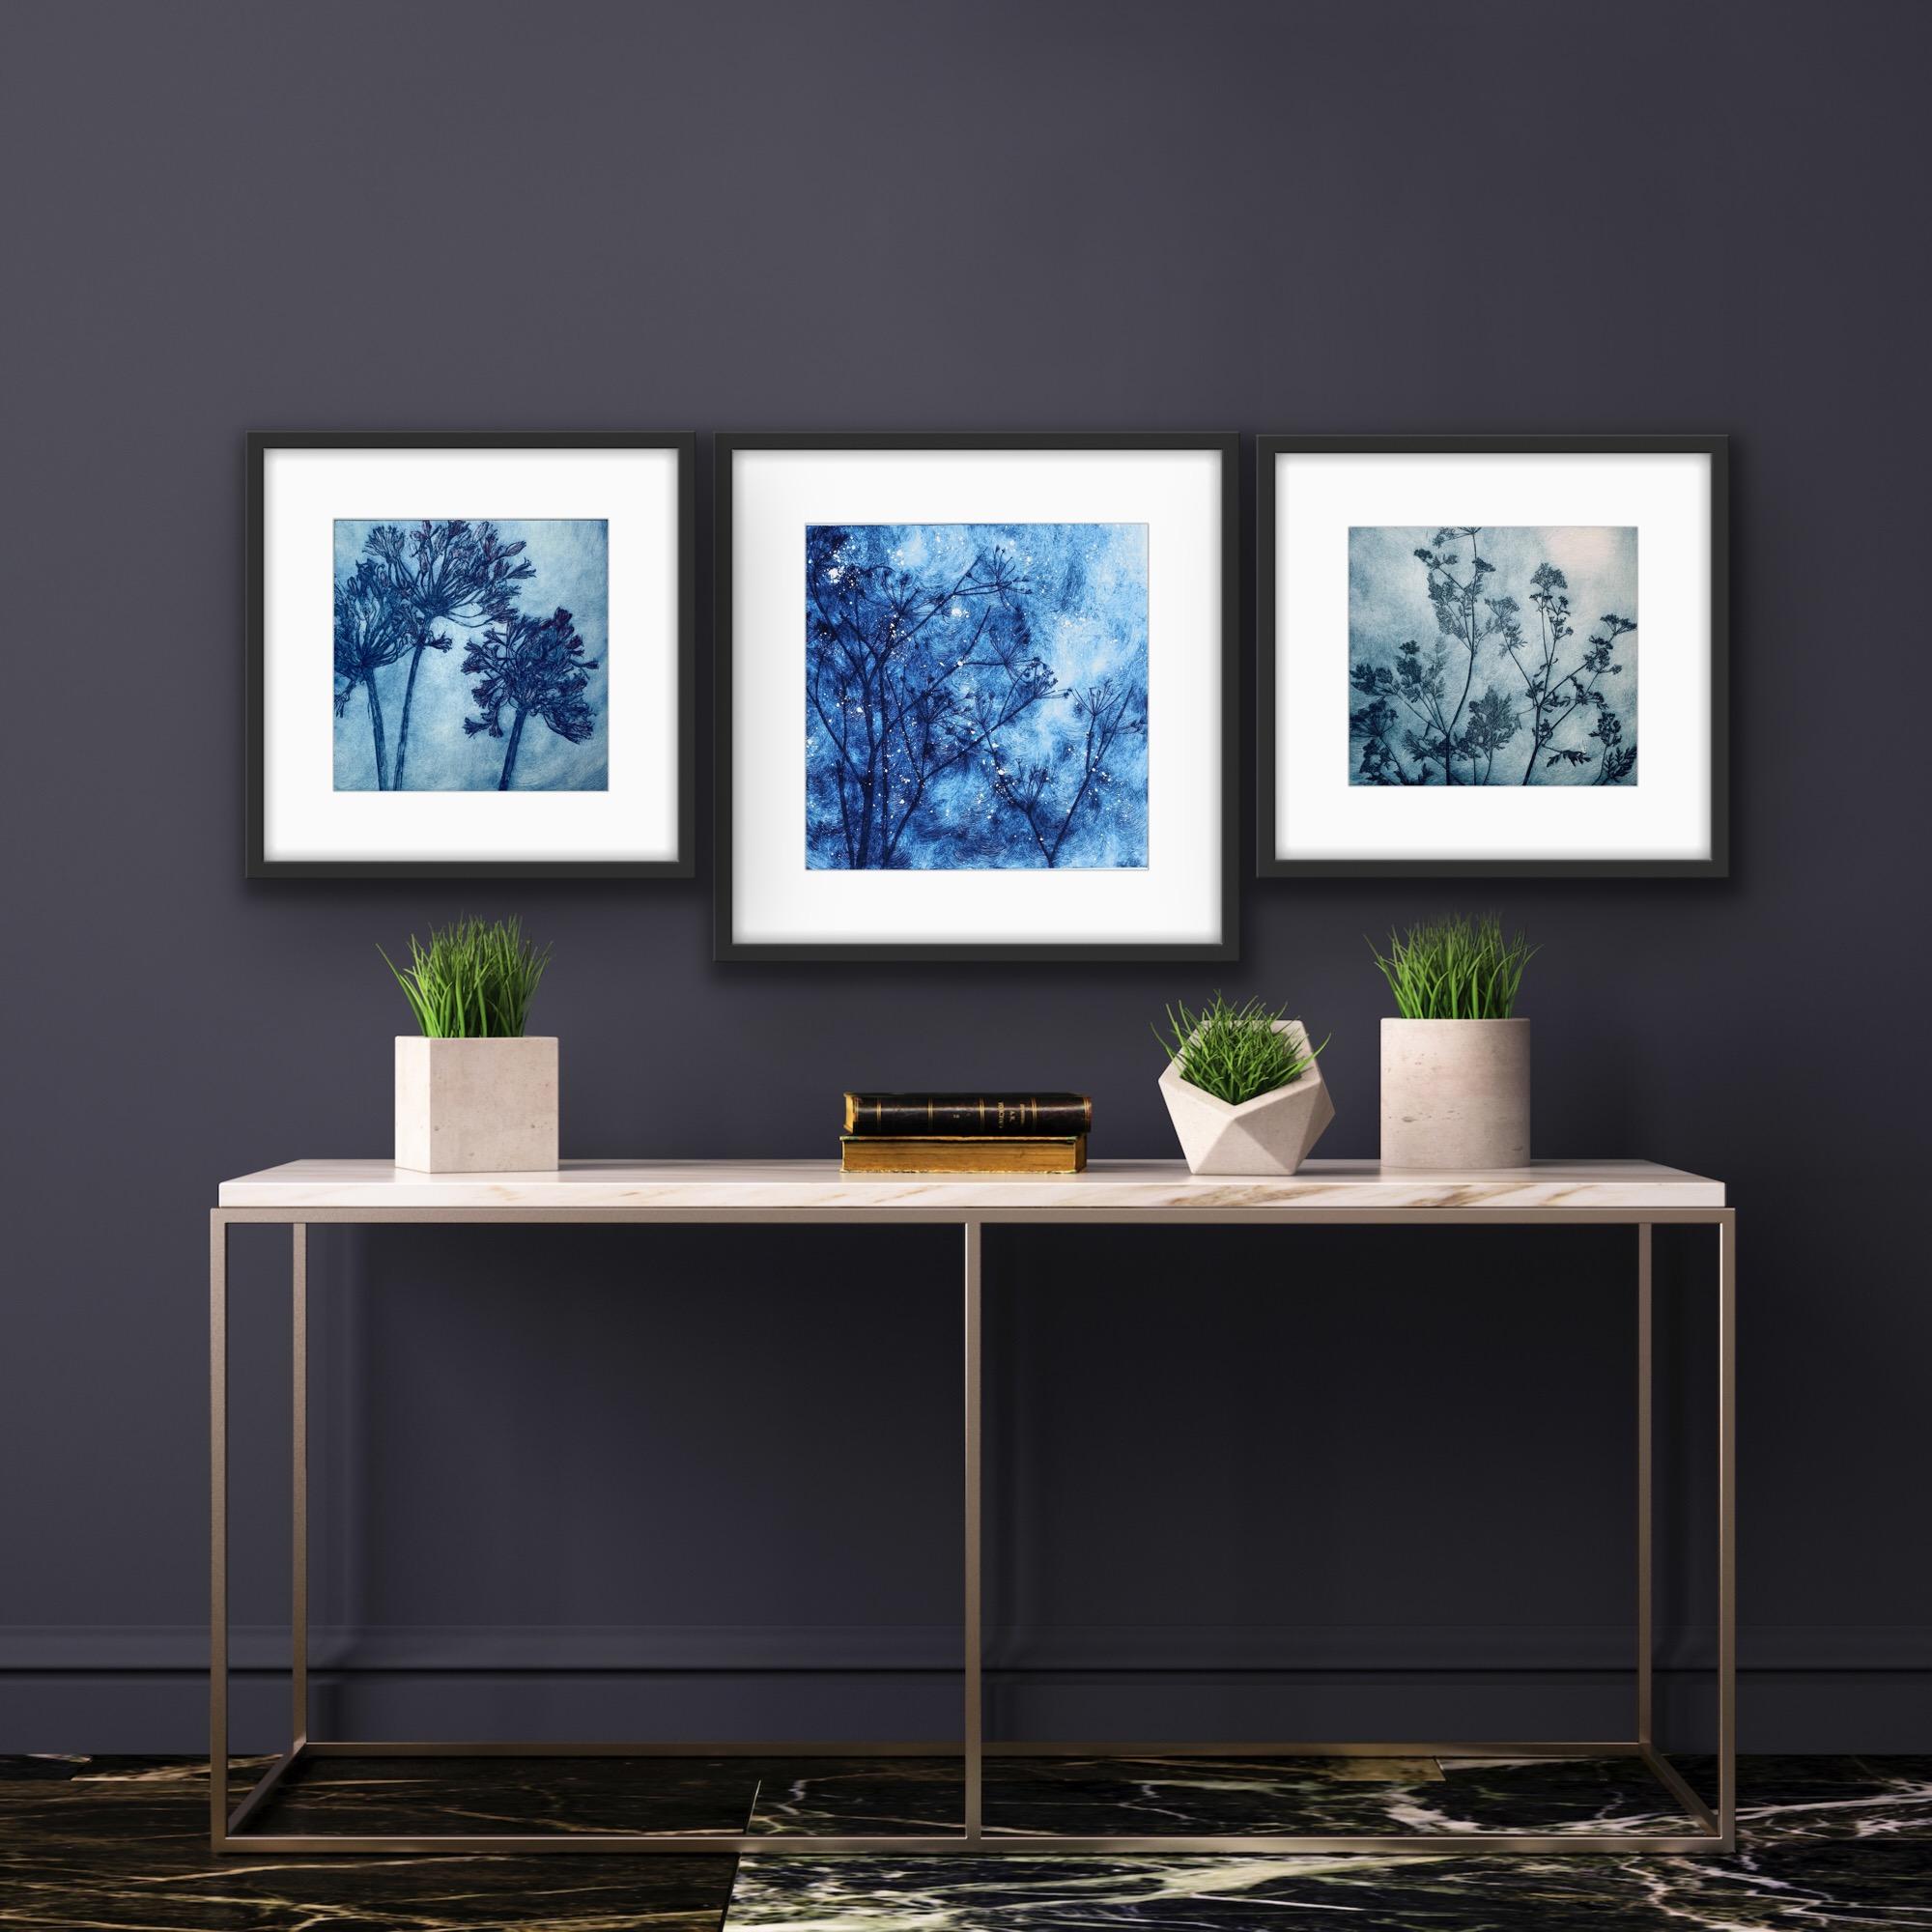 Winter Winds, Agapanthus and Delicate Cowparsley Triptych - Print by Charlie Davies